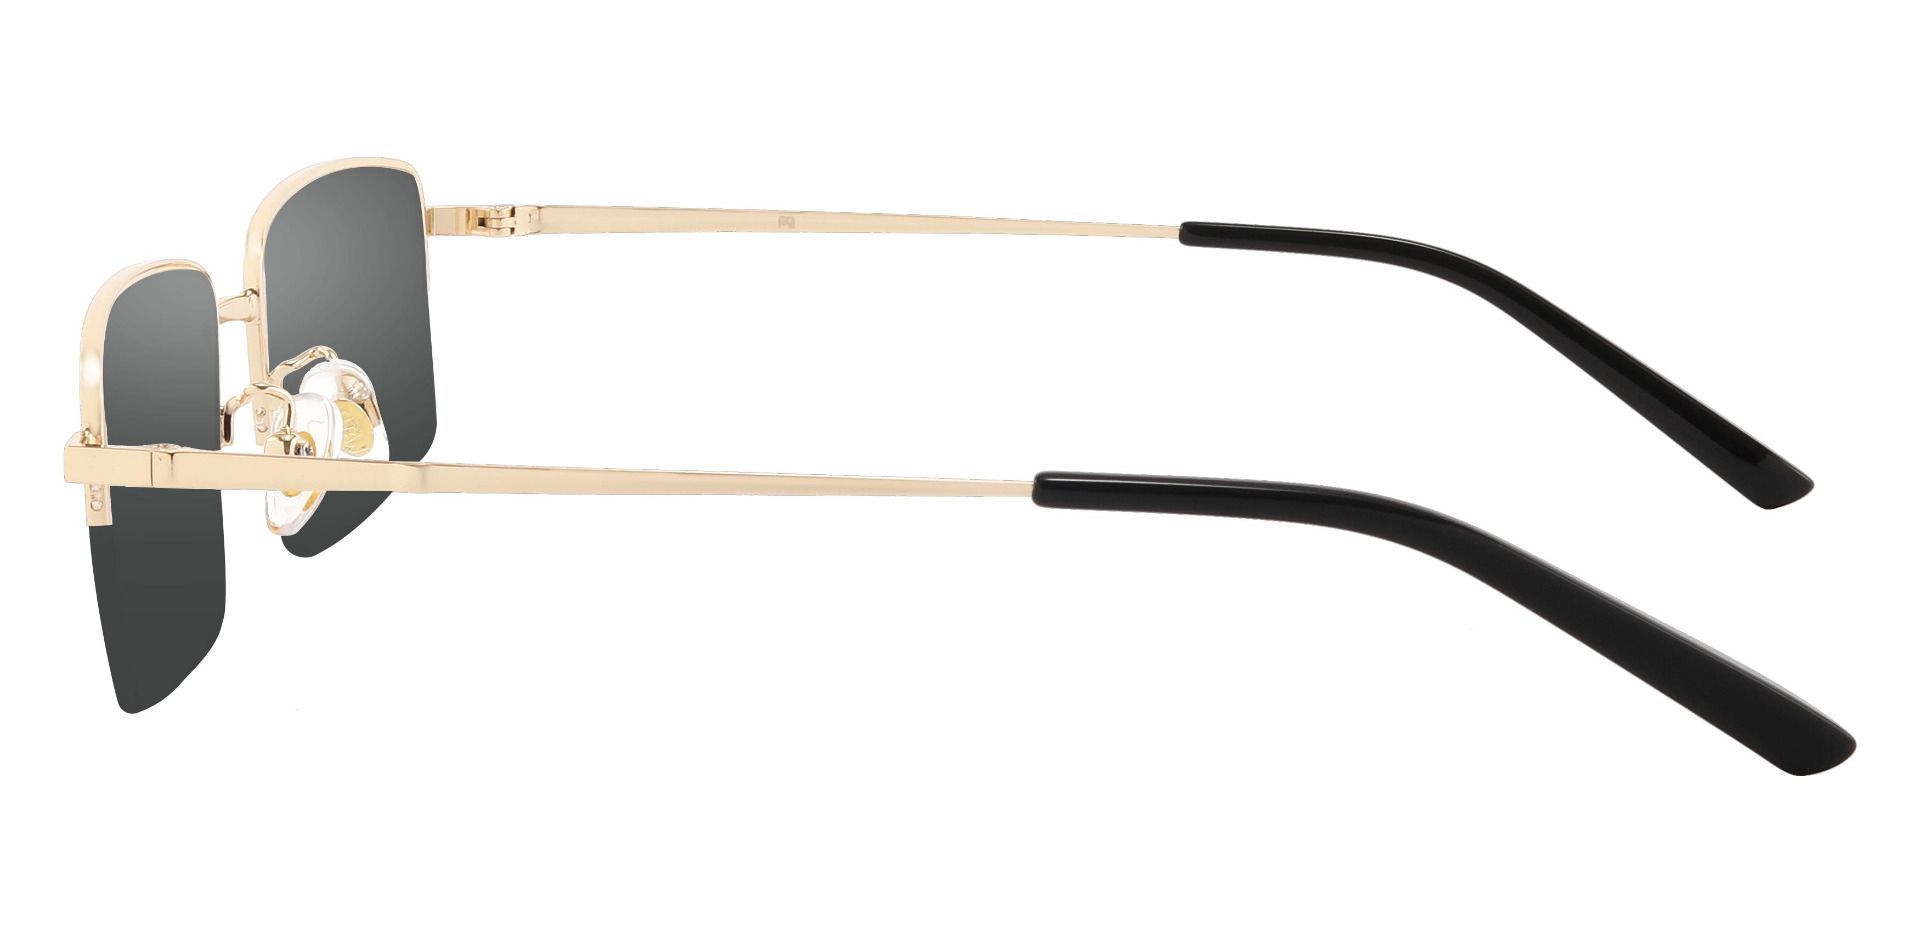 Wayne Rectangle Non-Rx Sunglasses - Gold Frame With Gray Lenses